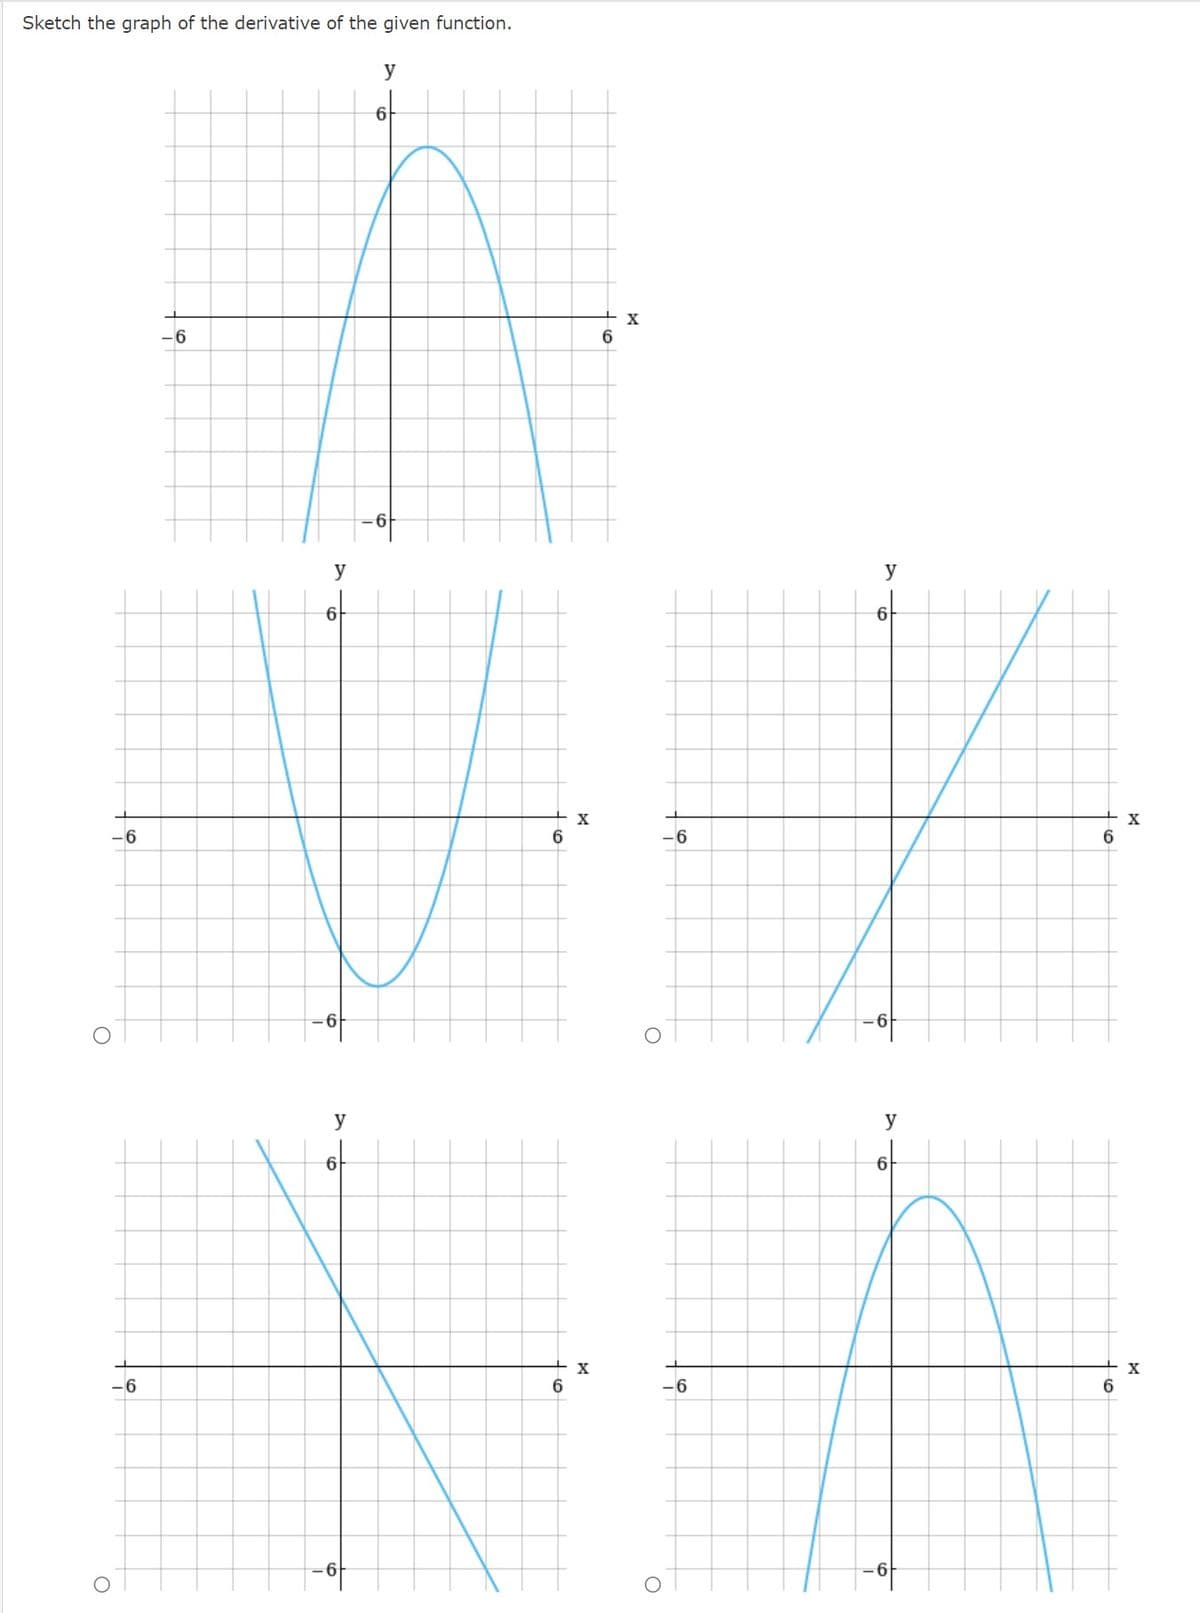 Sketch the graph of the derivative of the given function.
O
O
-6
-6
-6
y
6
y
6
y
6
6
6
X
X
+x
6
O
y
6
+
X
6
6
-6
y
6
6
X